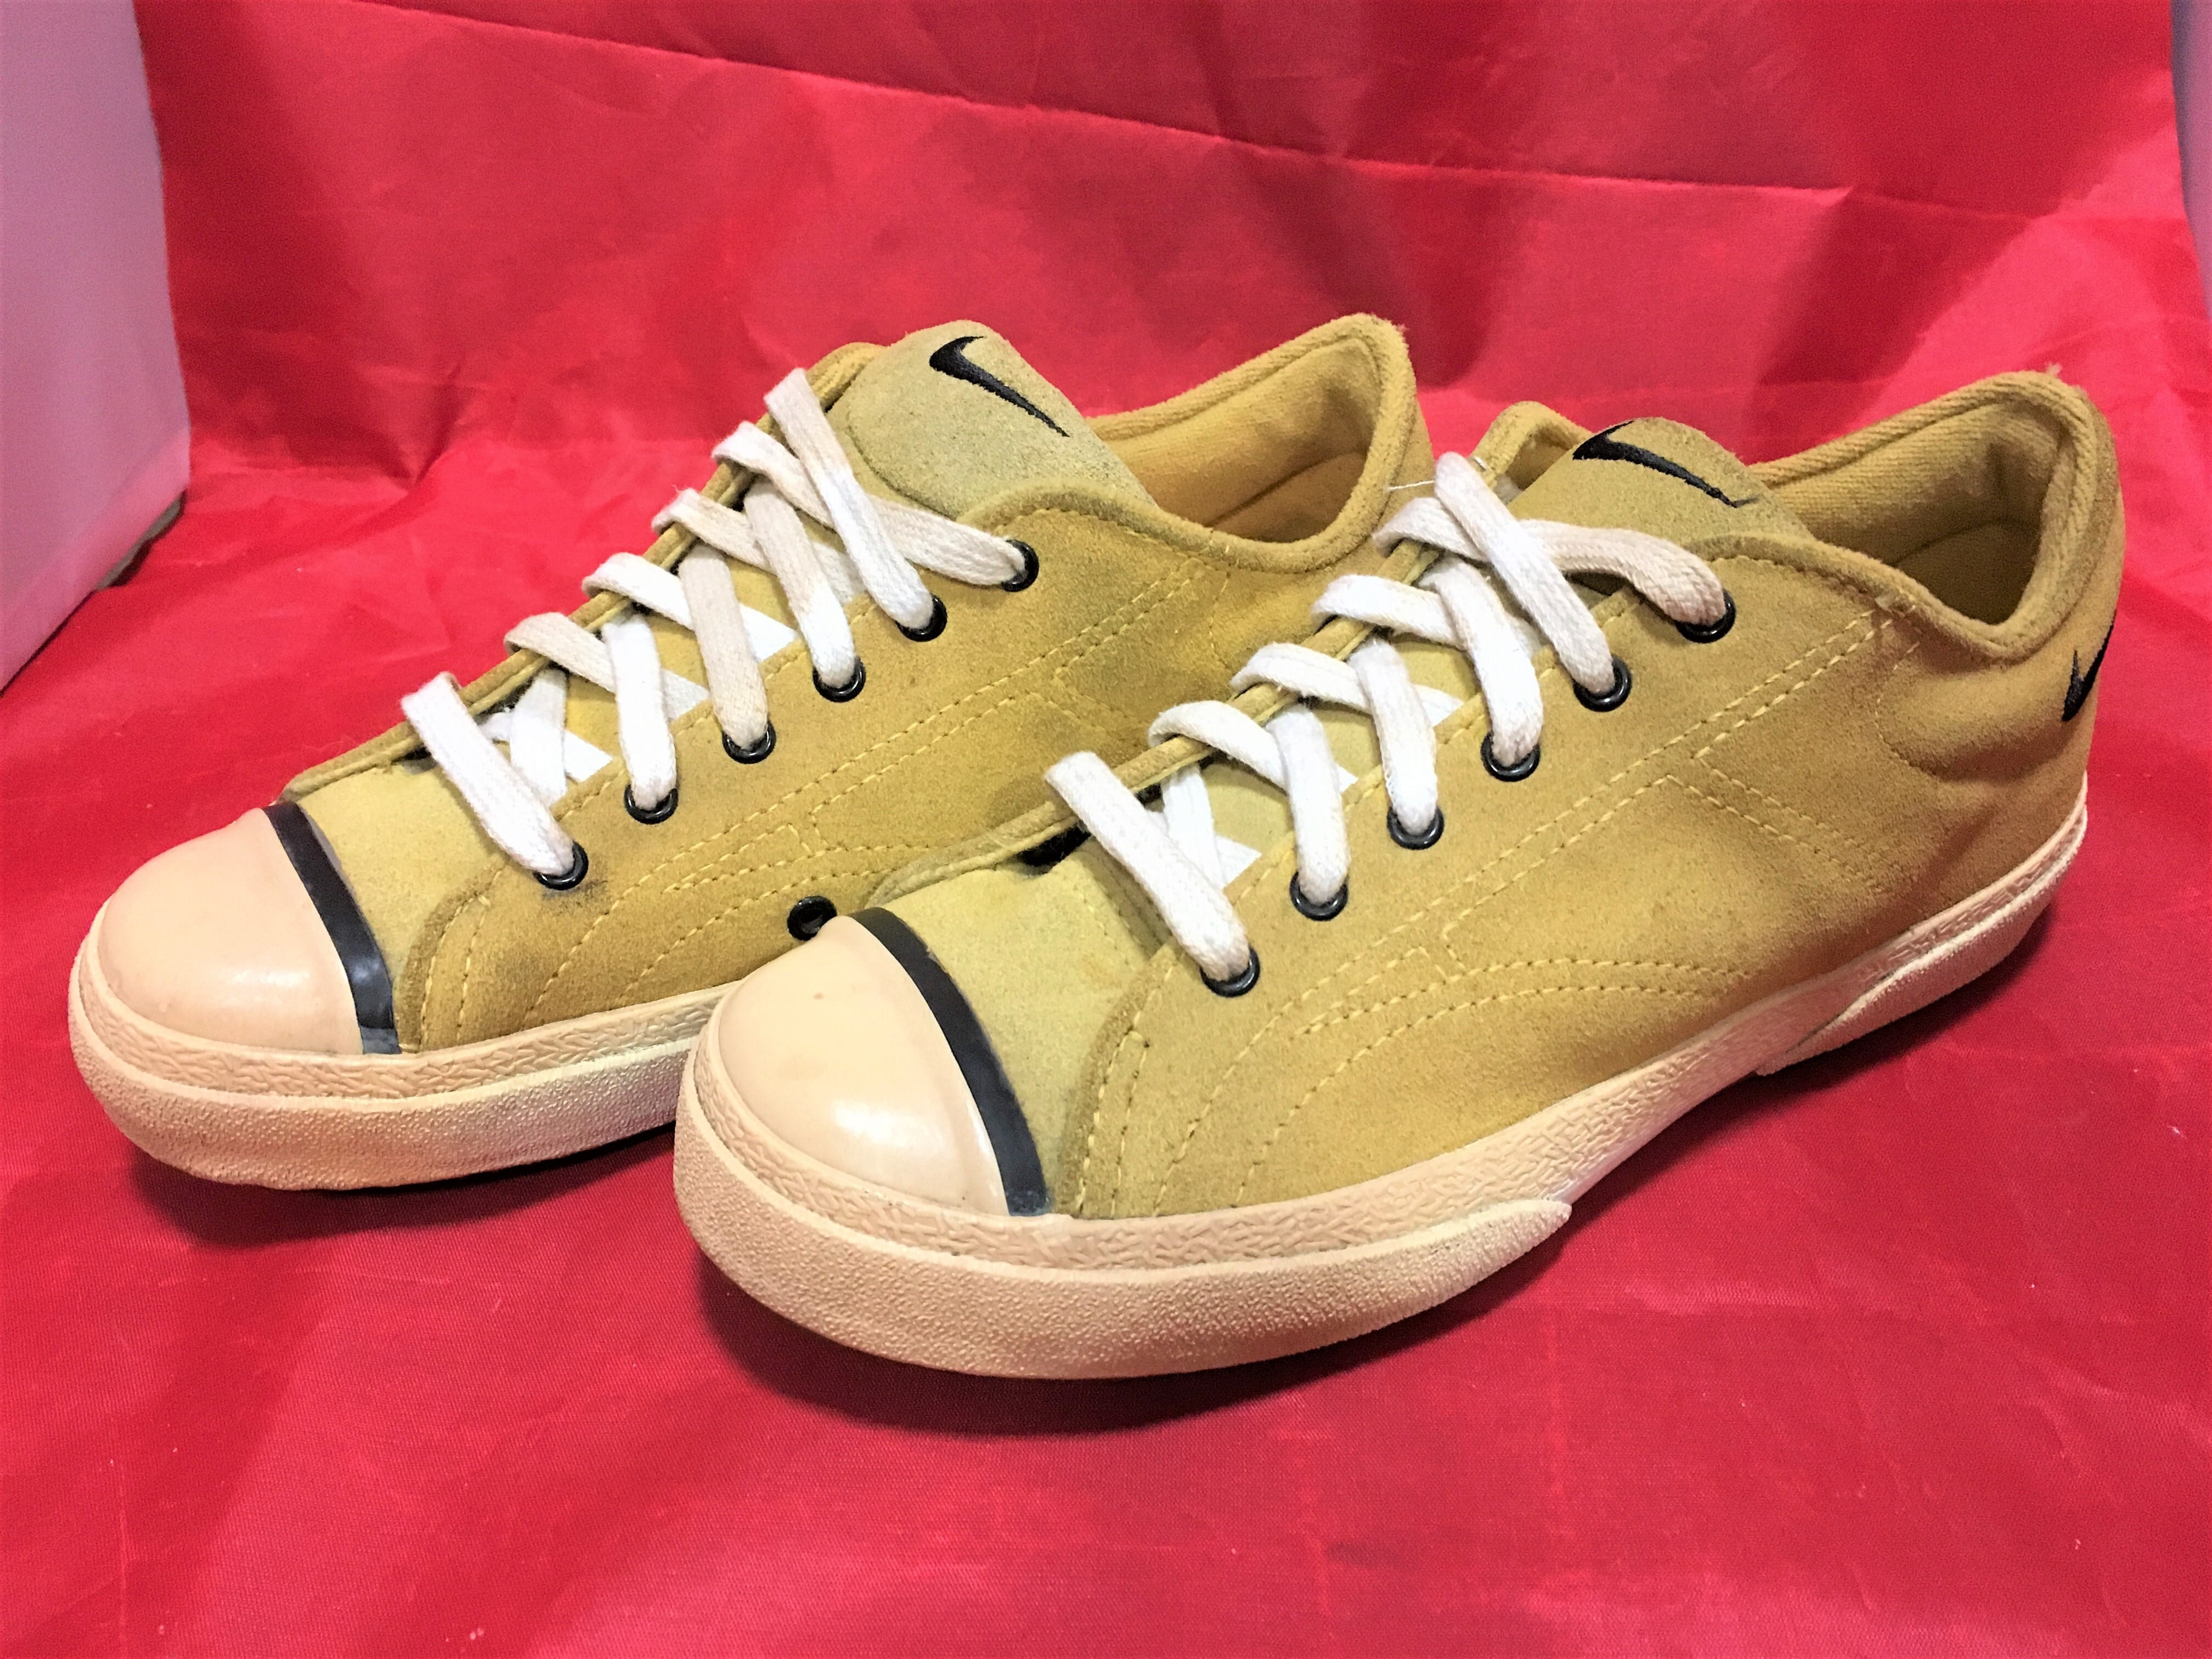 NIKE（ナイキ）COURT BISCUIT SUEDE（コートビスケット）6 23cm